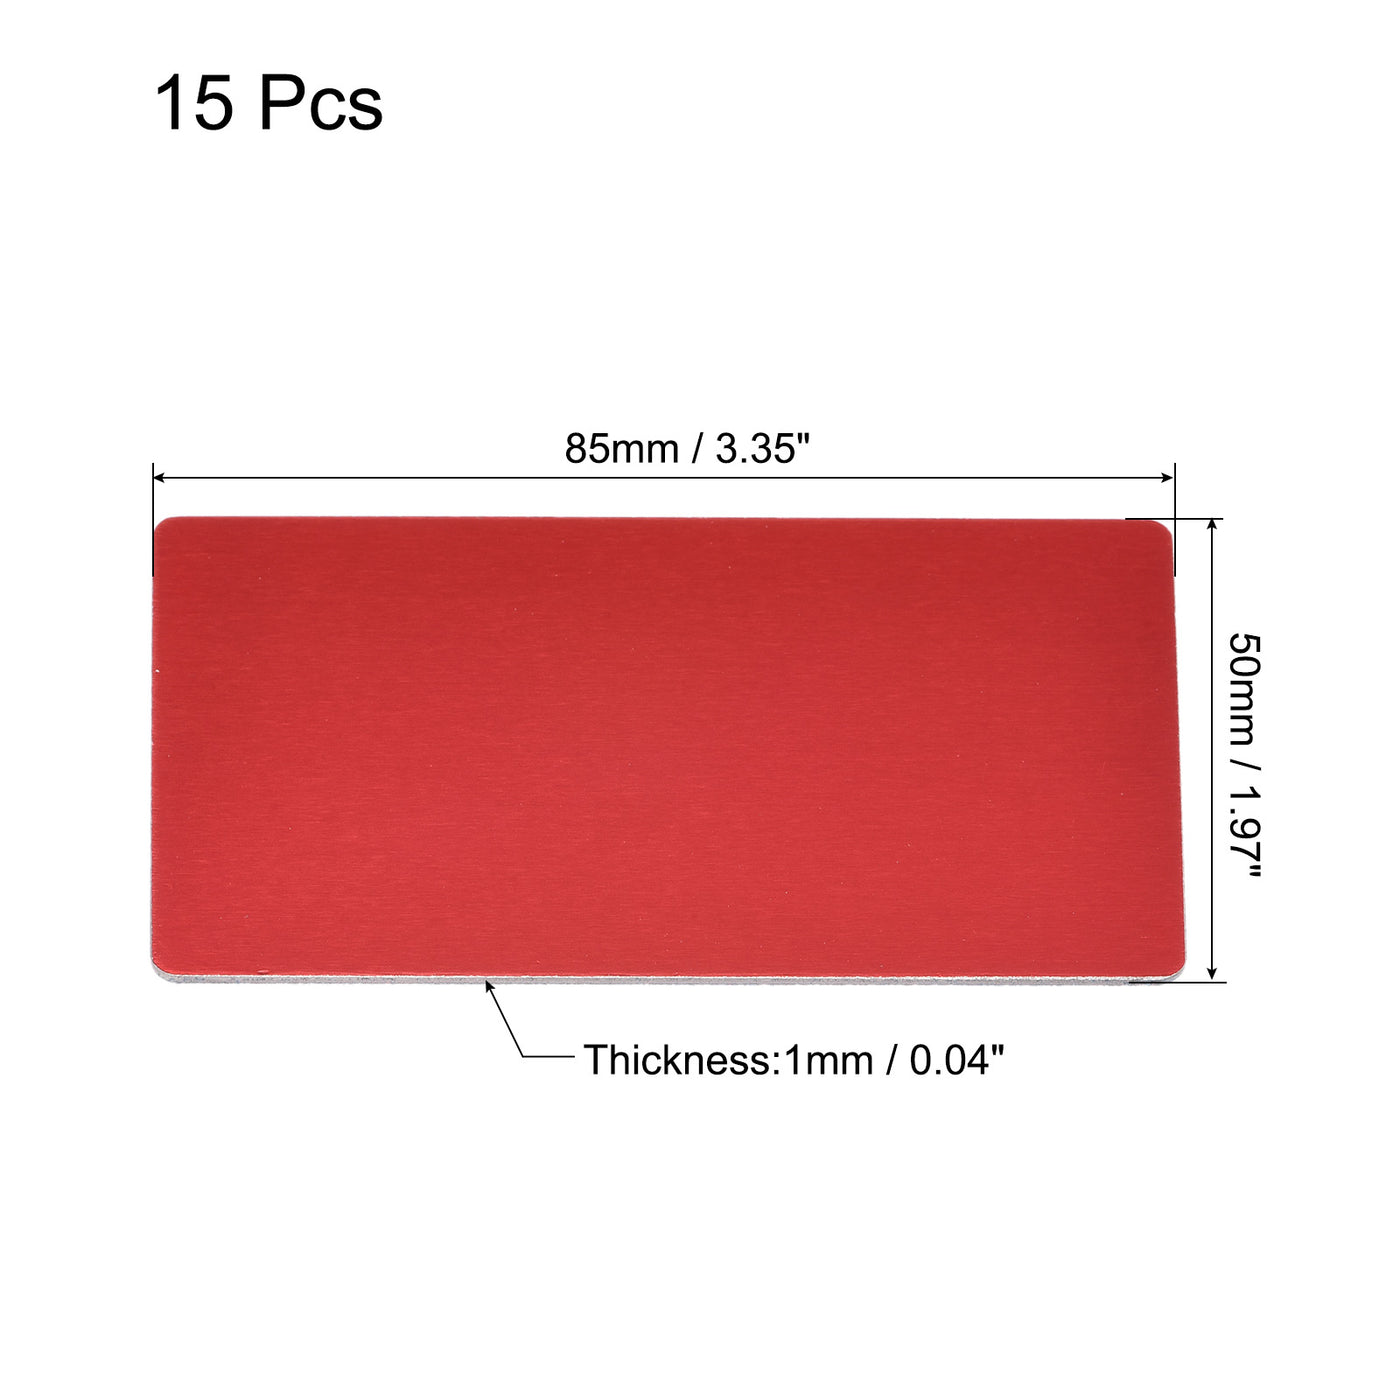 Uxcell Uxcell Blank Metal Card 85mm x 50mm x 1mm Anodized Aluminum Plate Red 15 Pcs